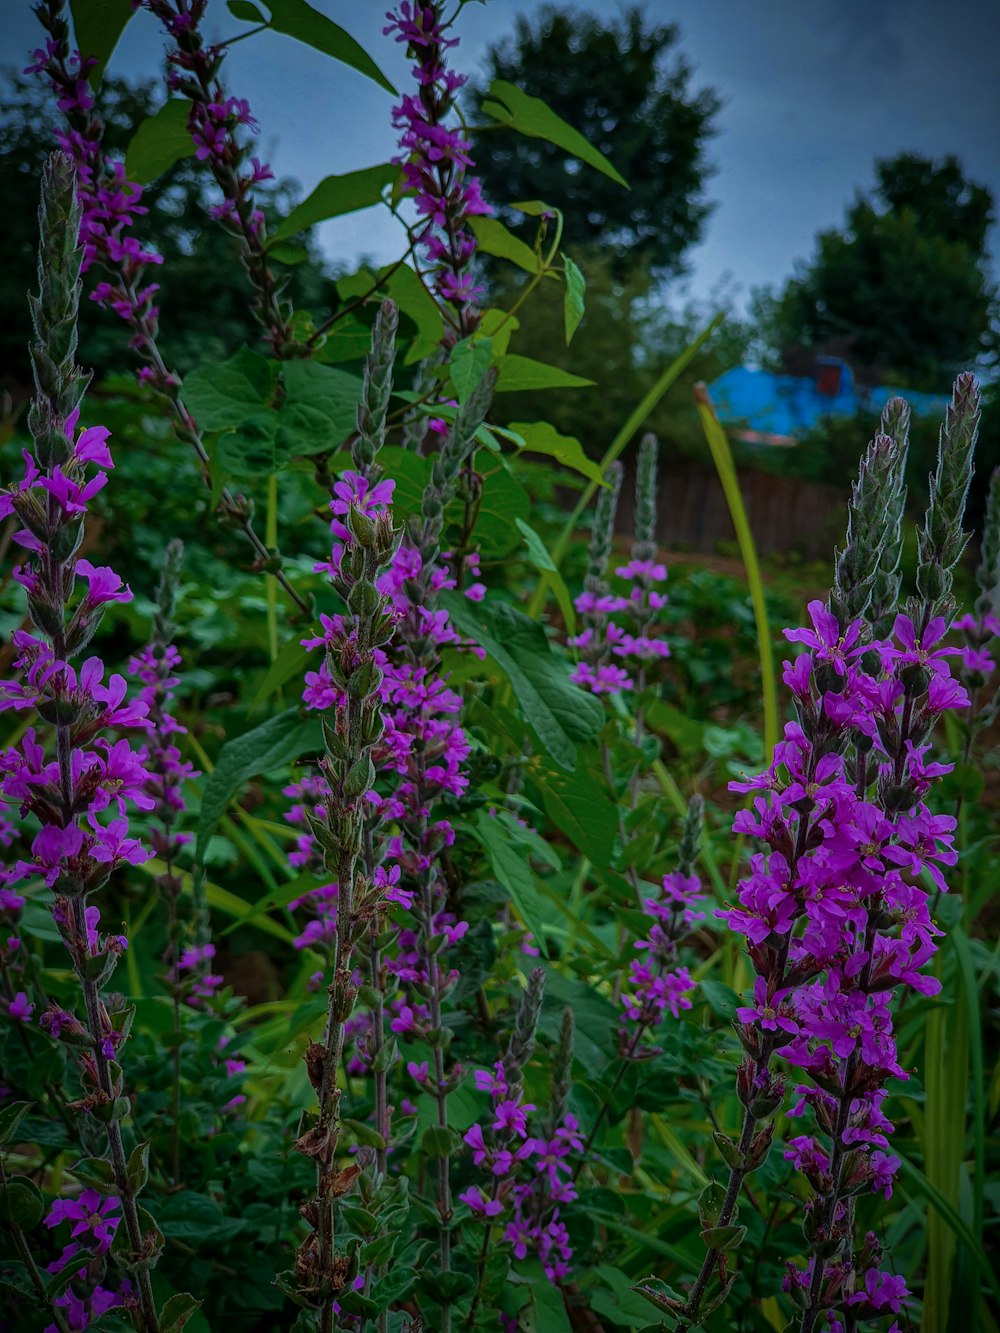 purple flowers are blooming in a garden